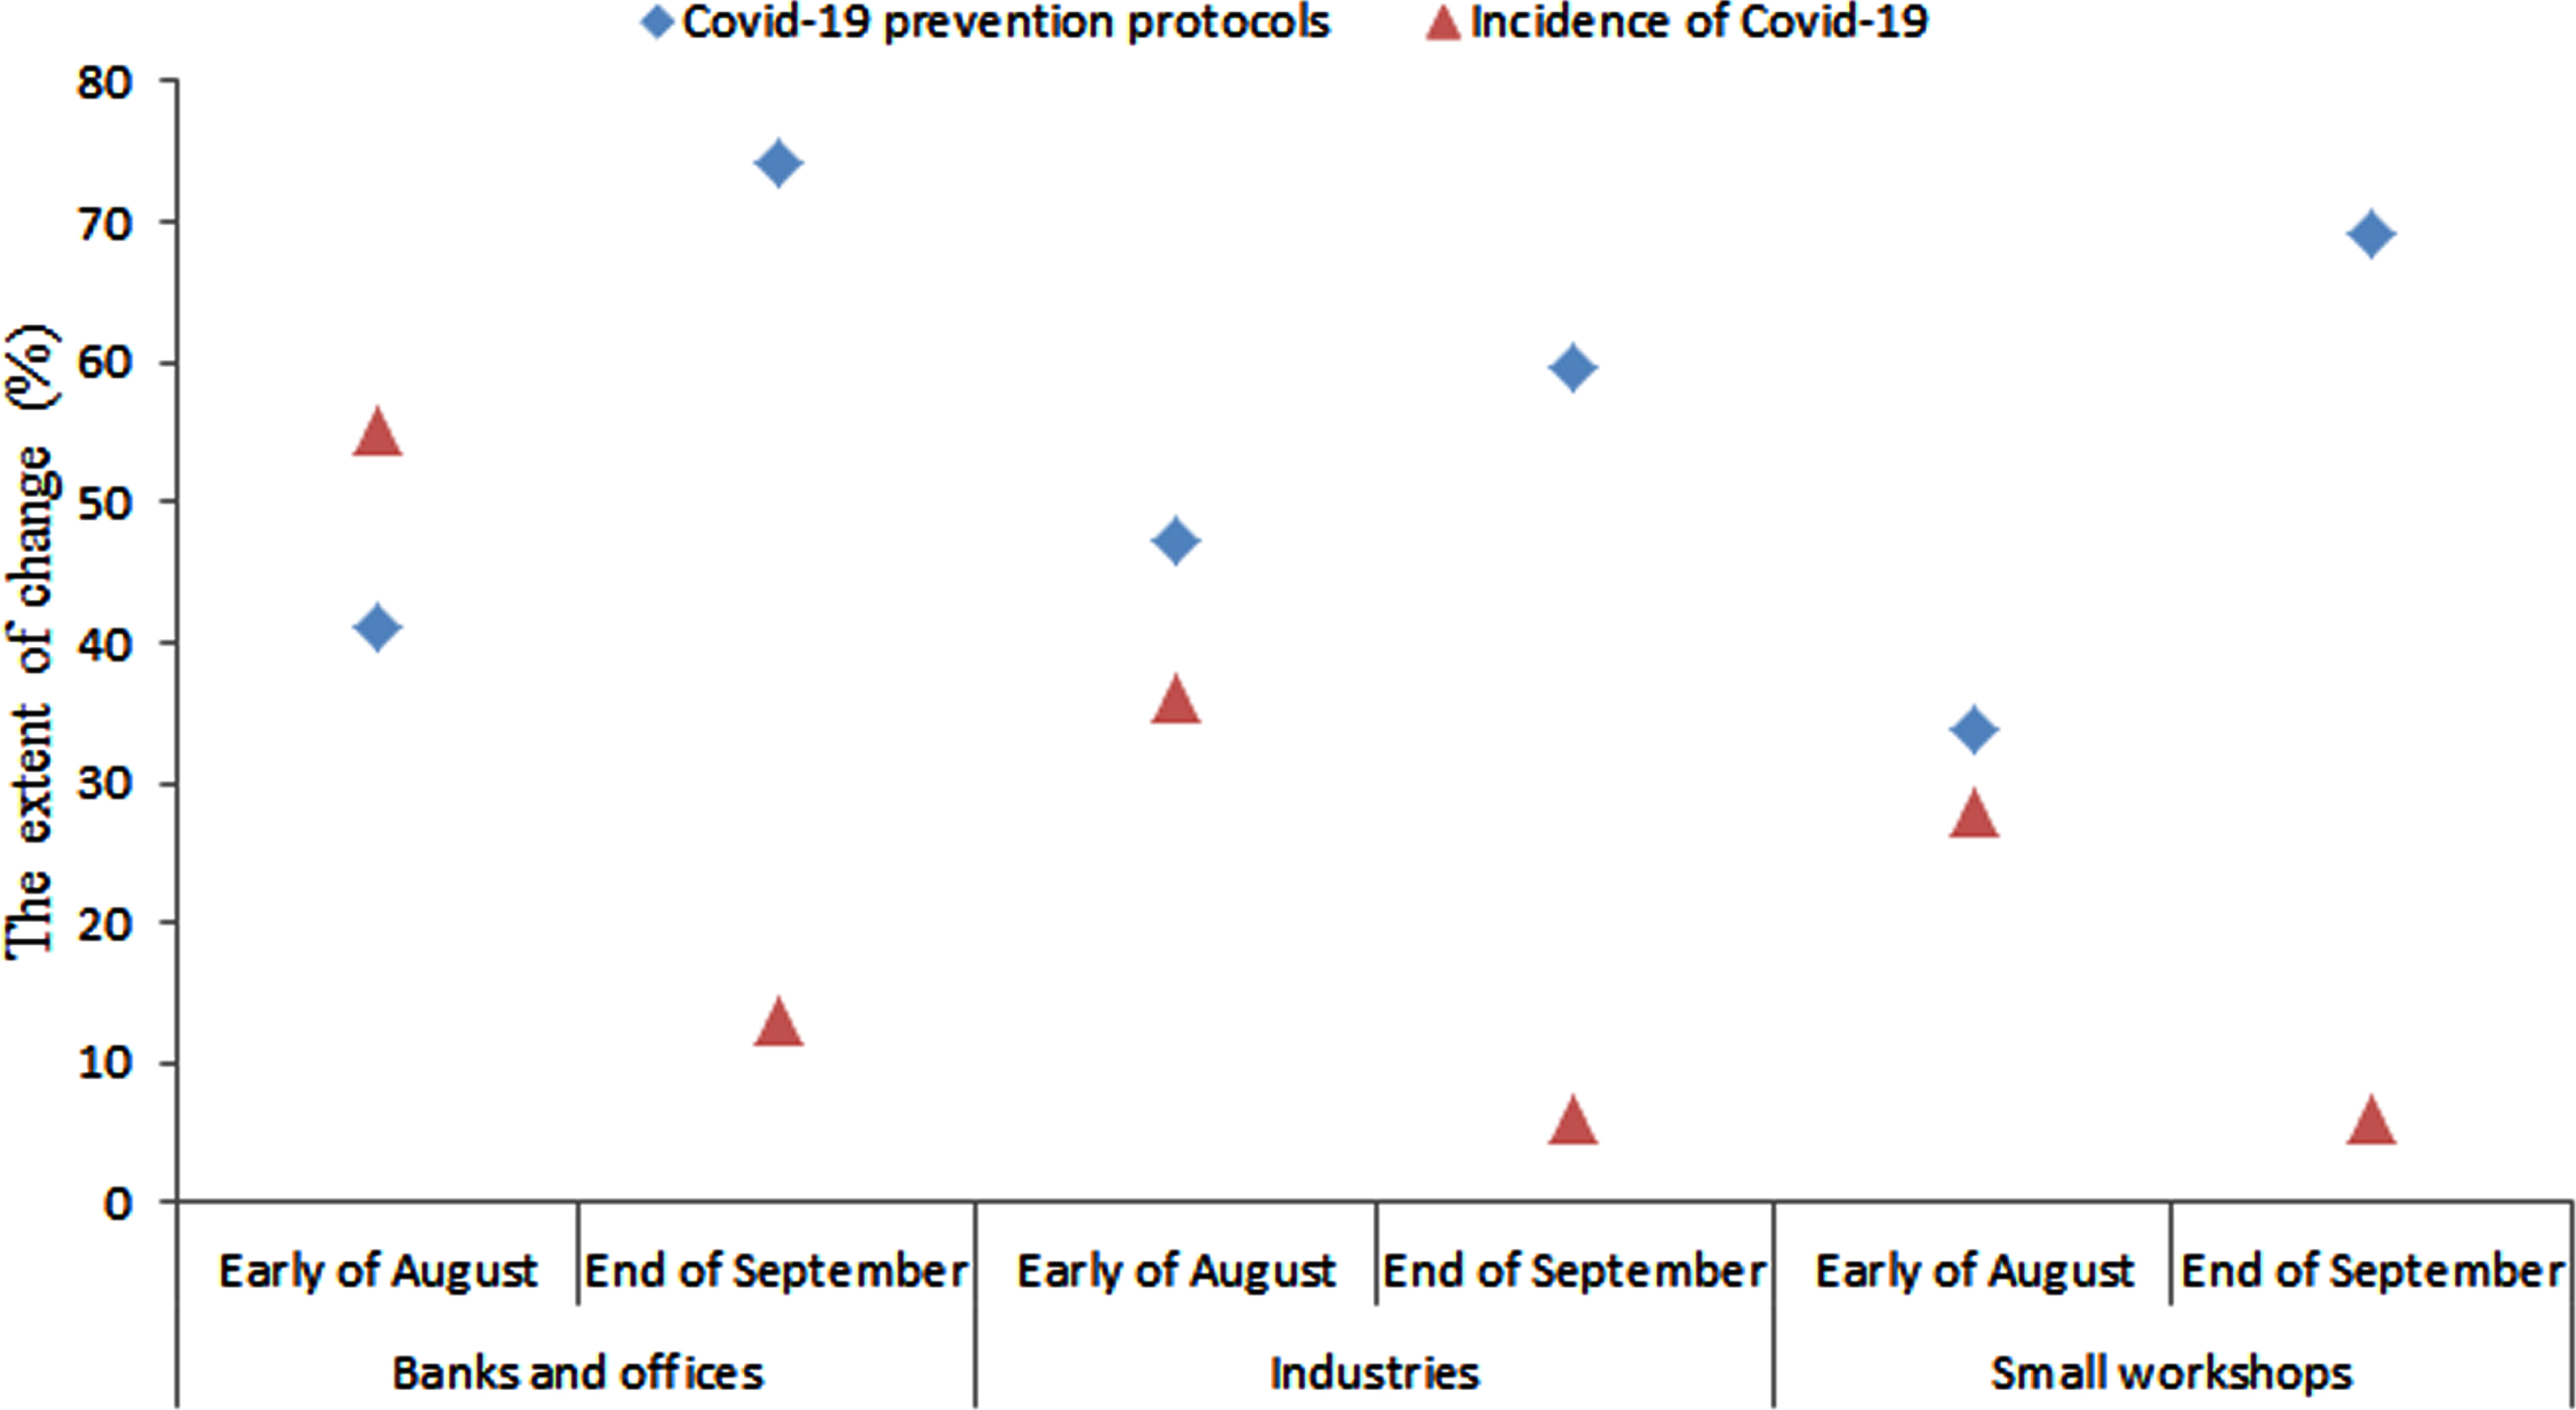 The relationship between performance of workplaces in the field of COVID-19 prevention protocols and the incidence of COVID-19.